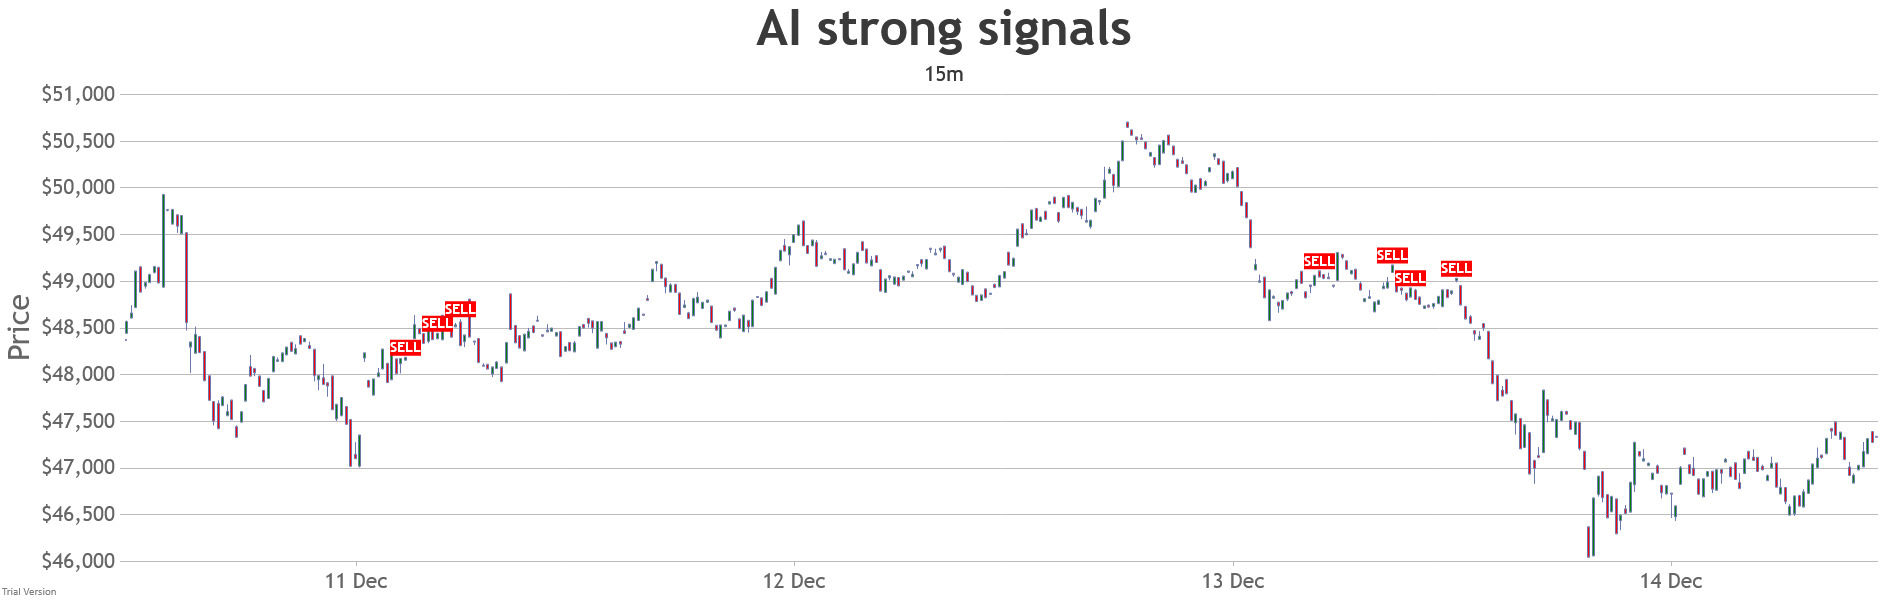 15min-combined-strong-ai-signals